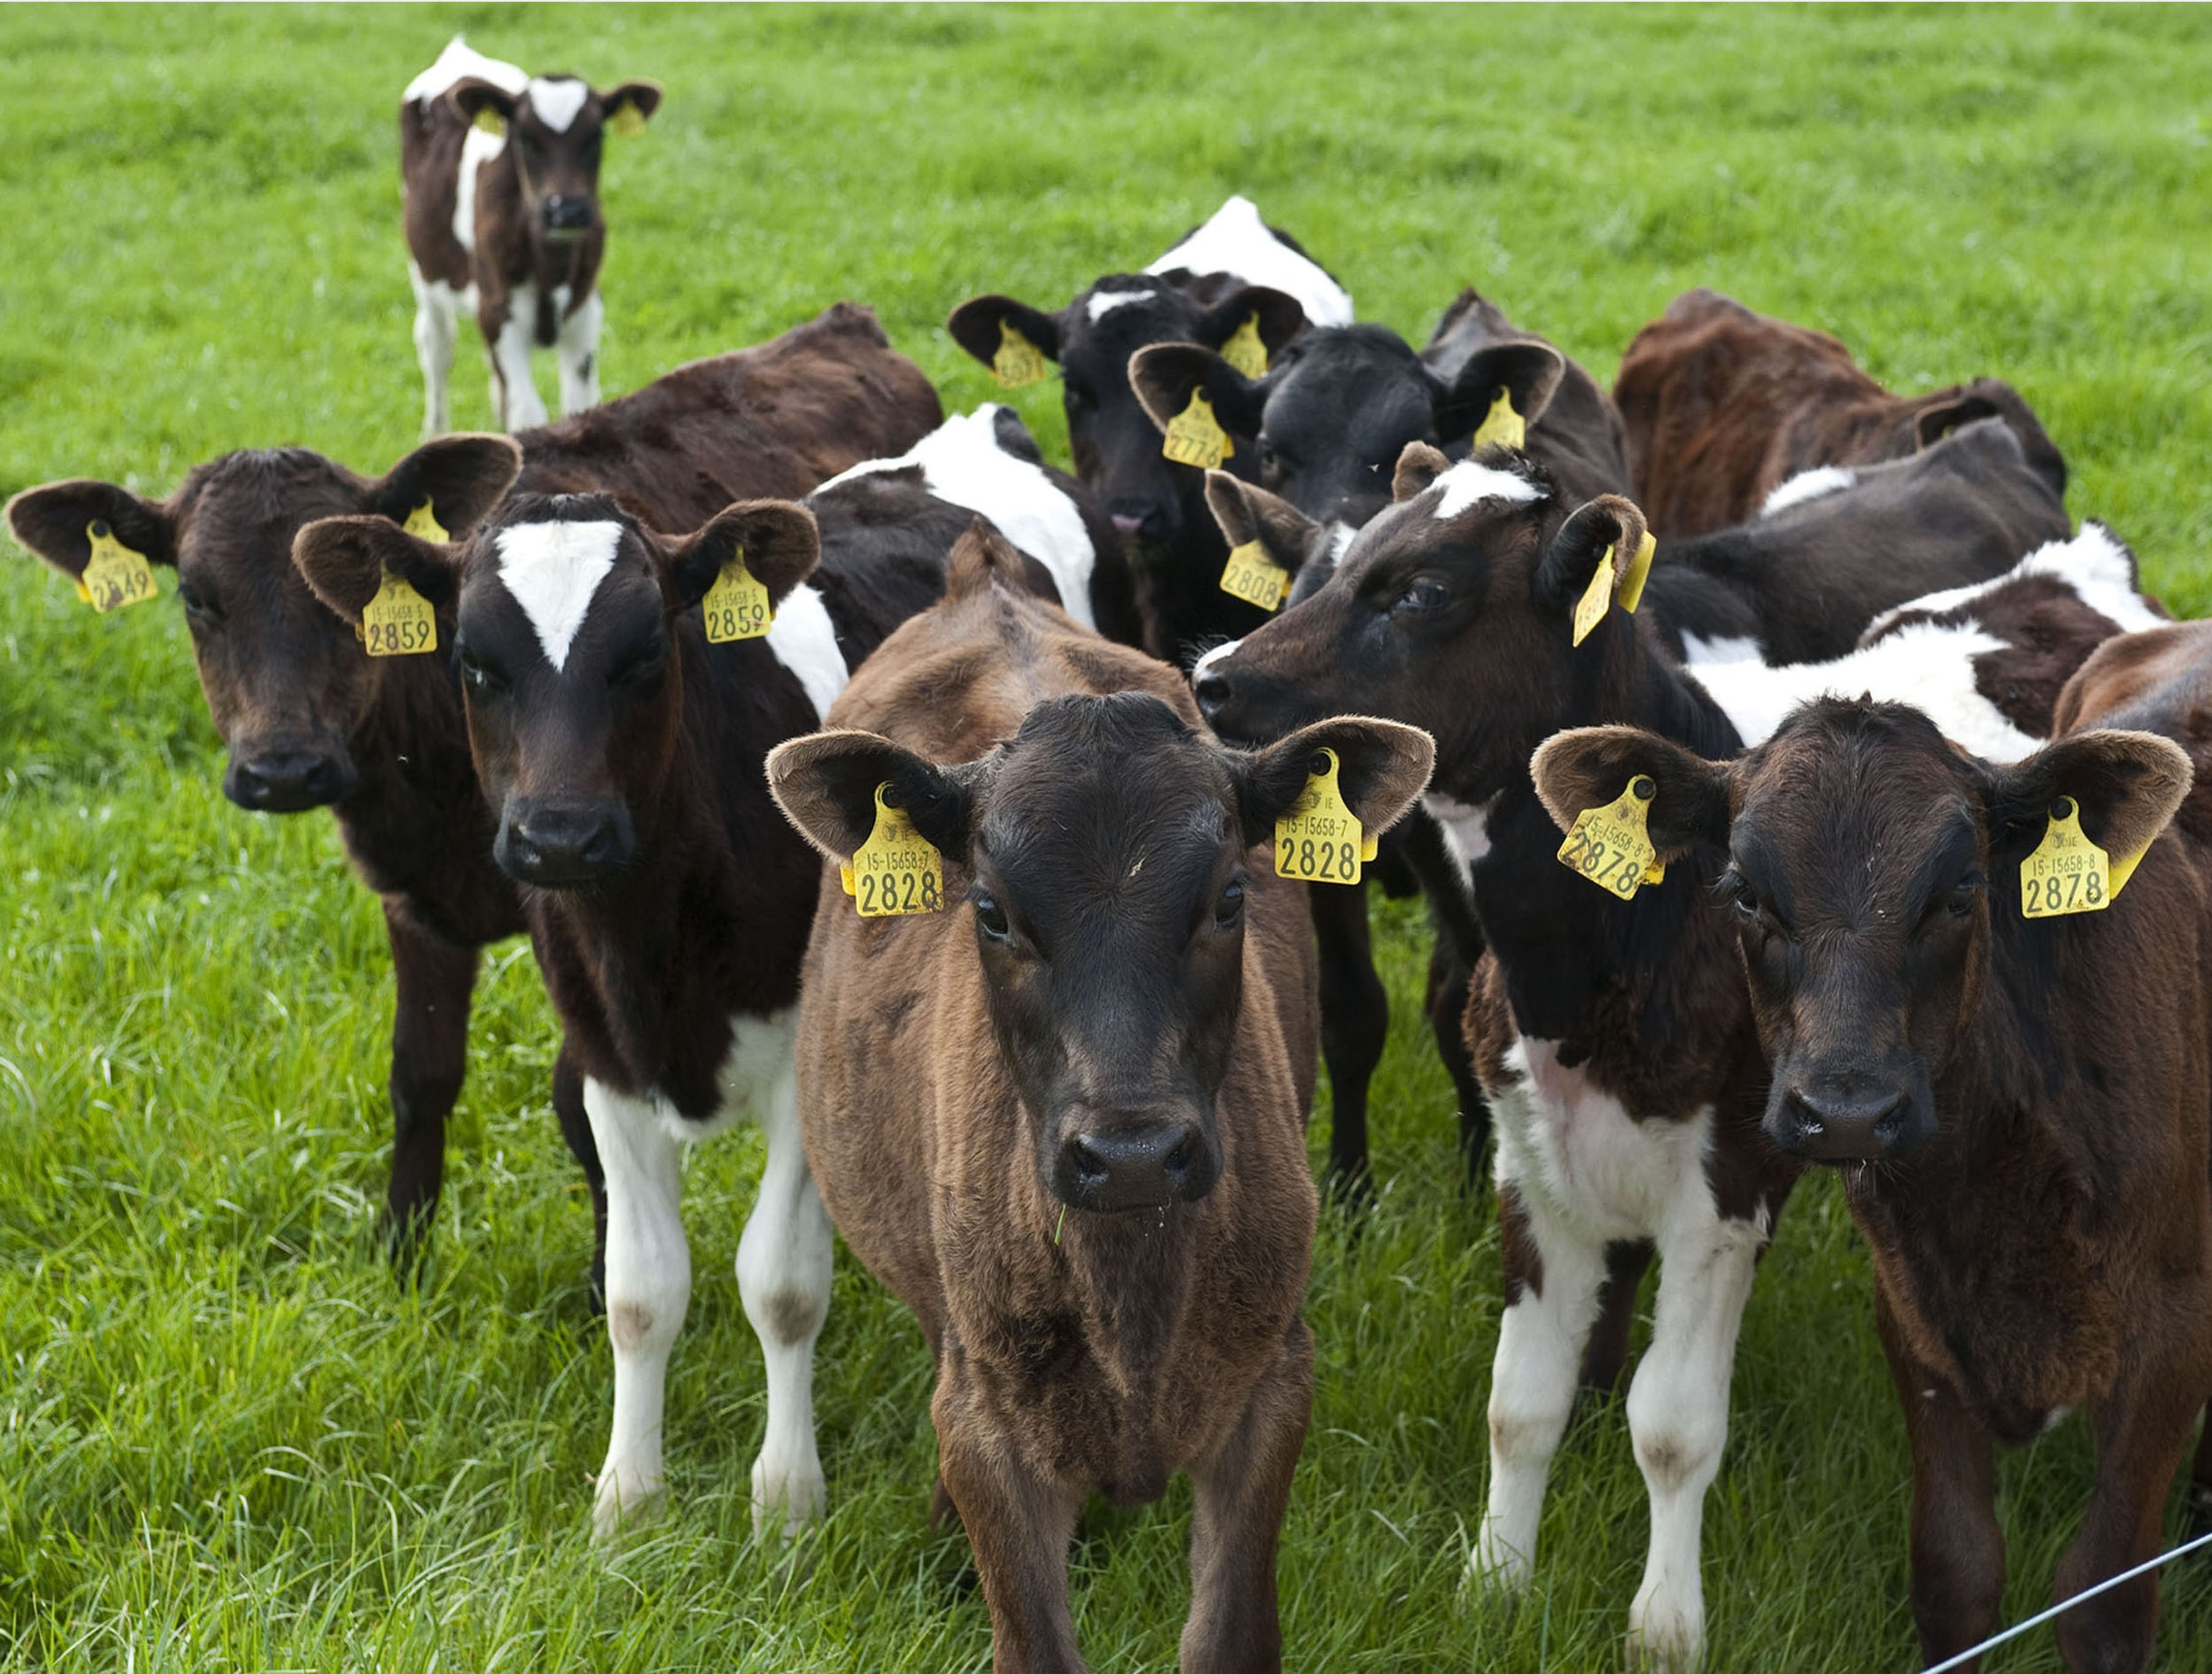 Dairy calves much more susceptible to stomach worms - Agriland